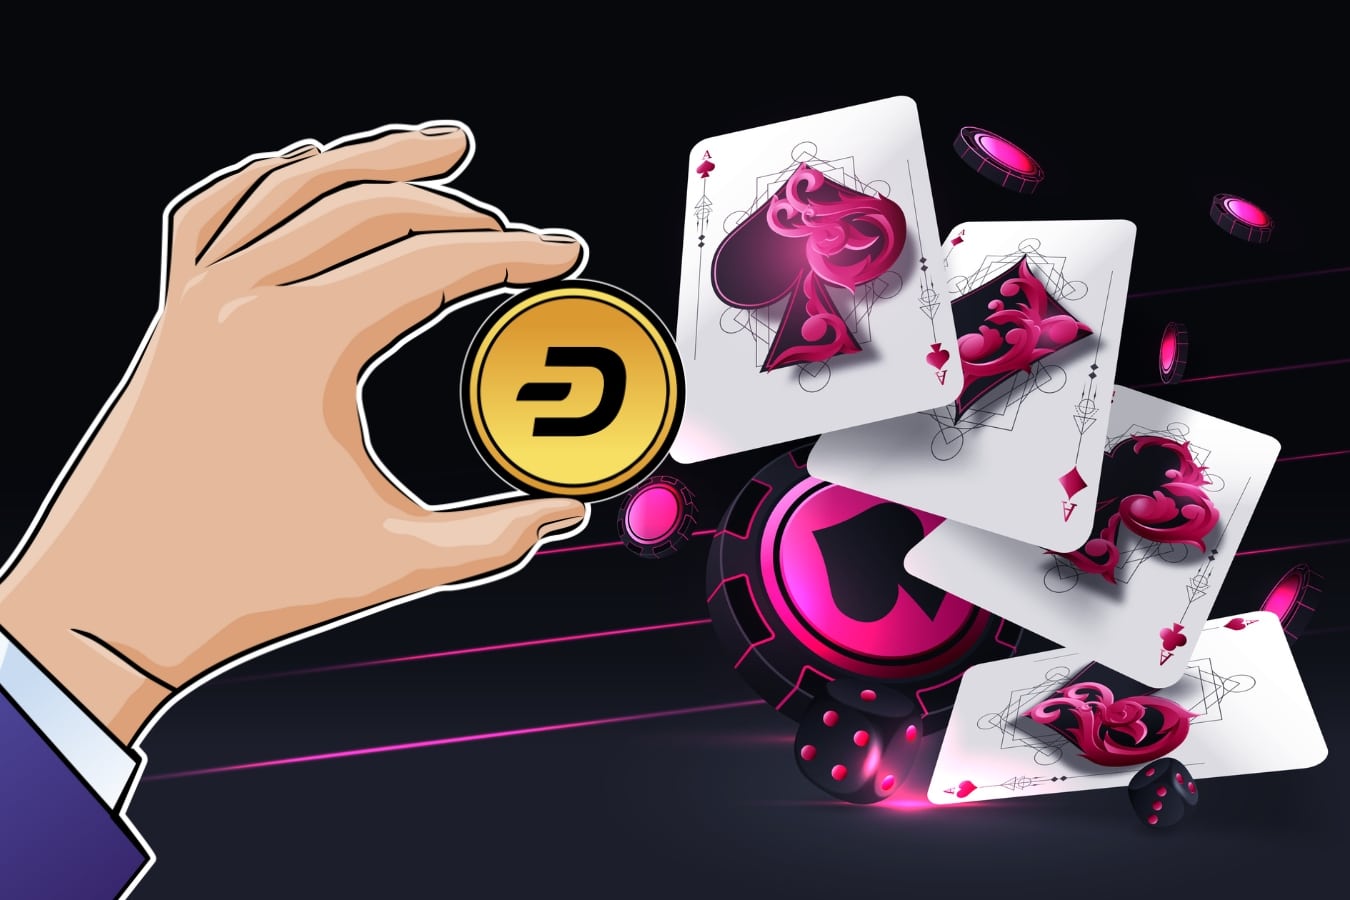 Understanding the concept of provably fair gambling with Dash